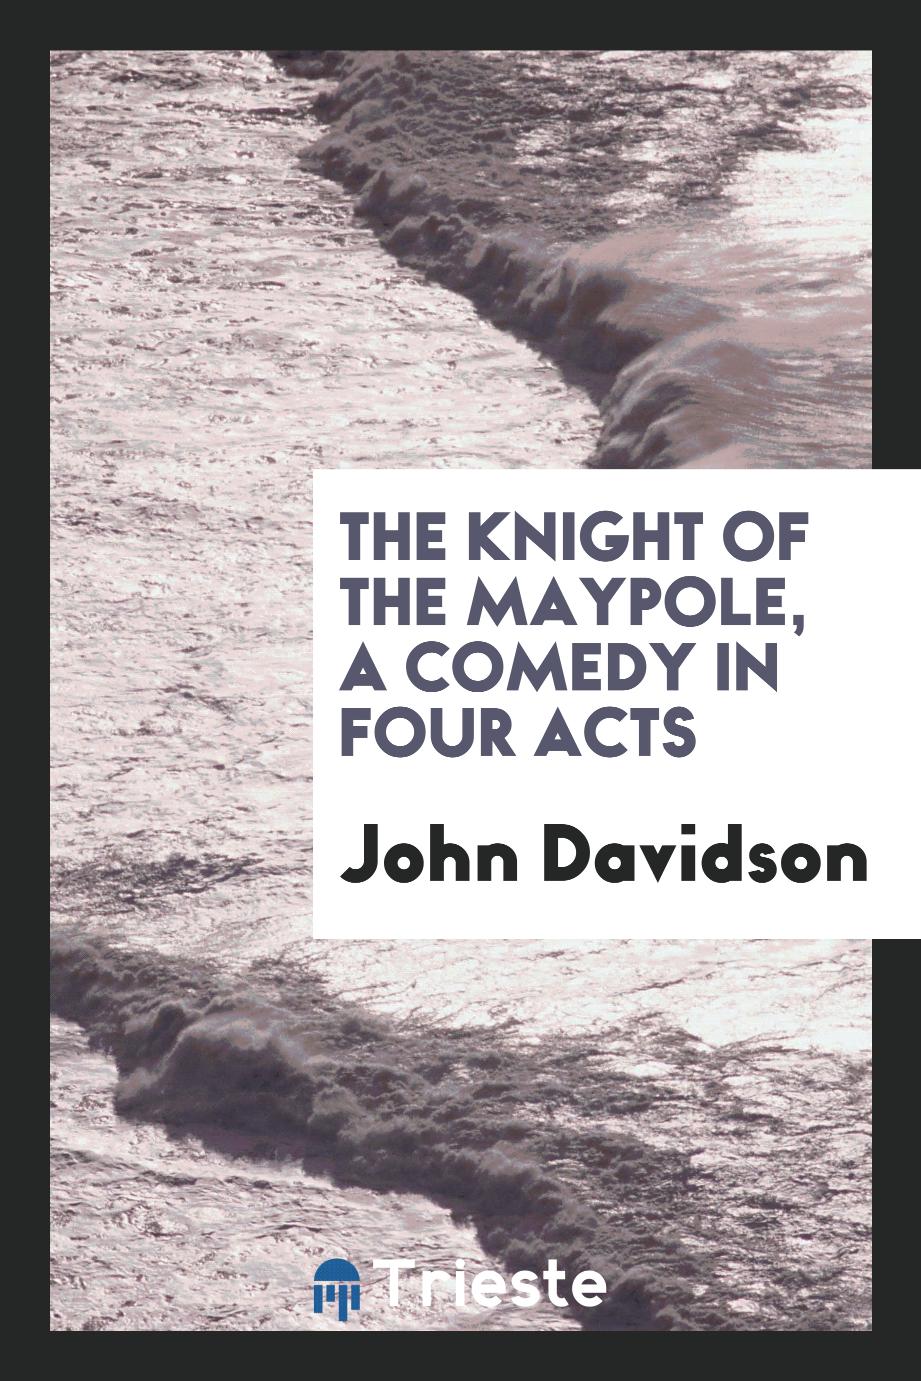 The knight of the maypole, a comedy in four acts